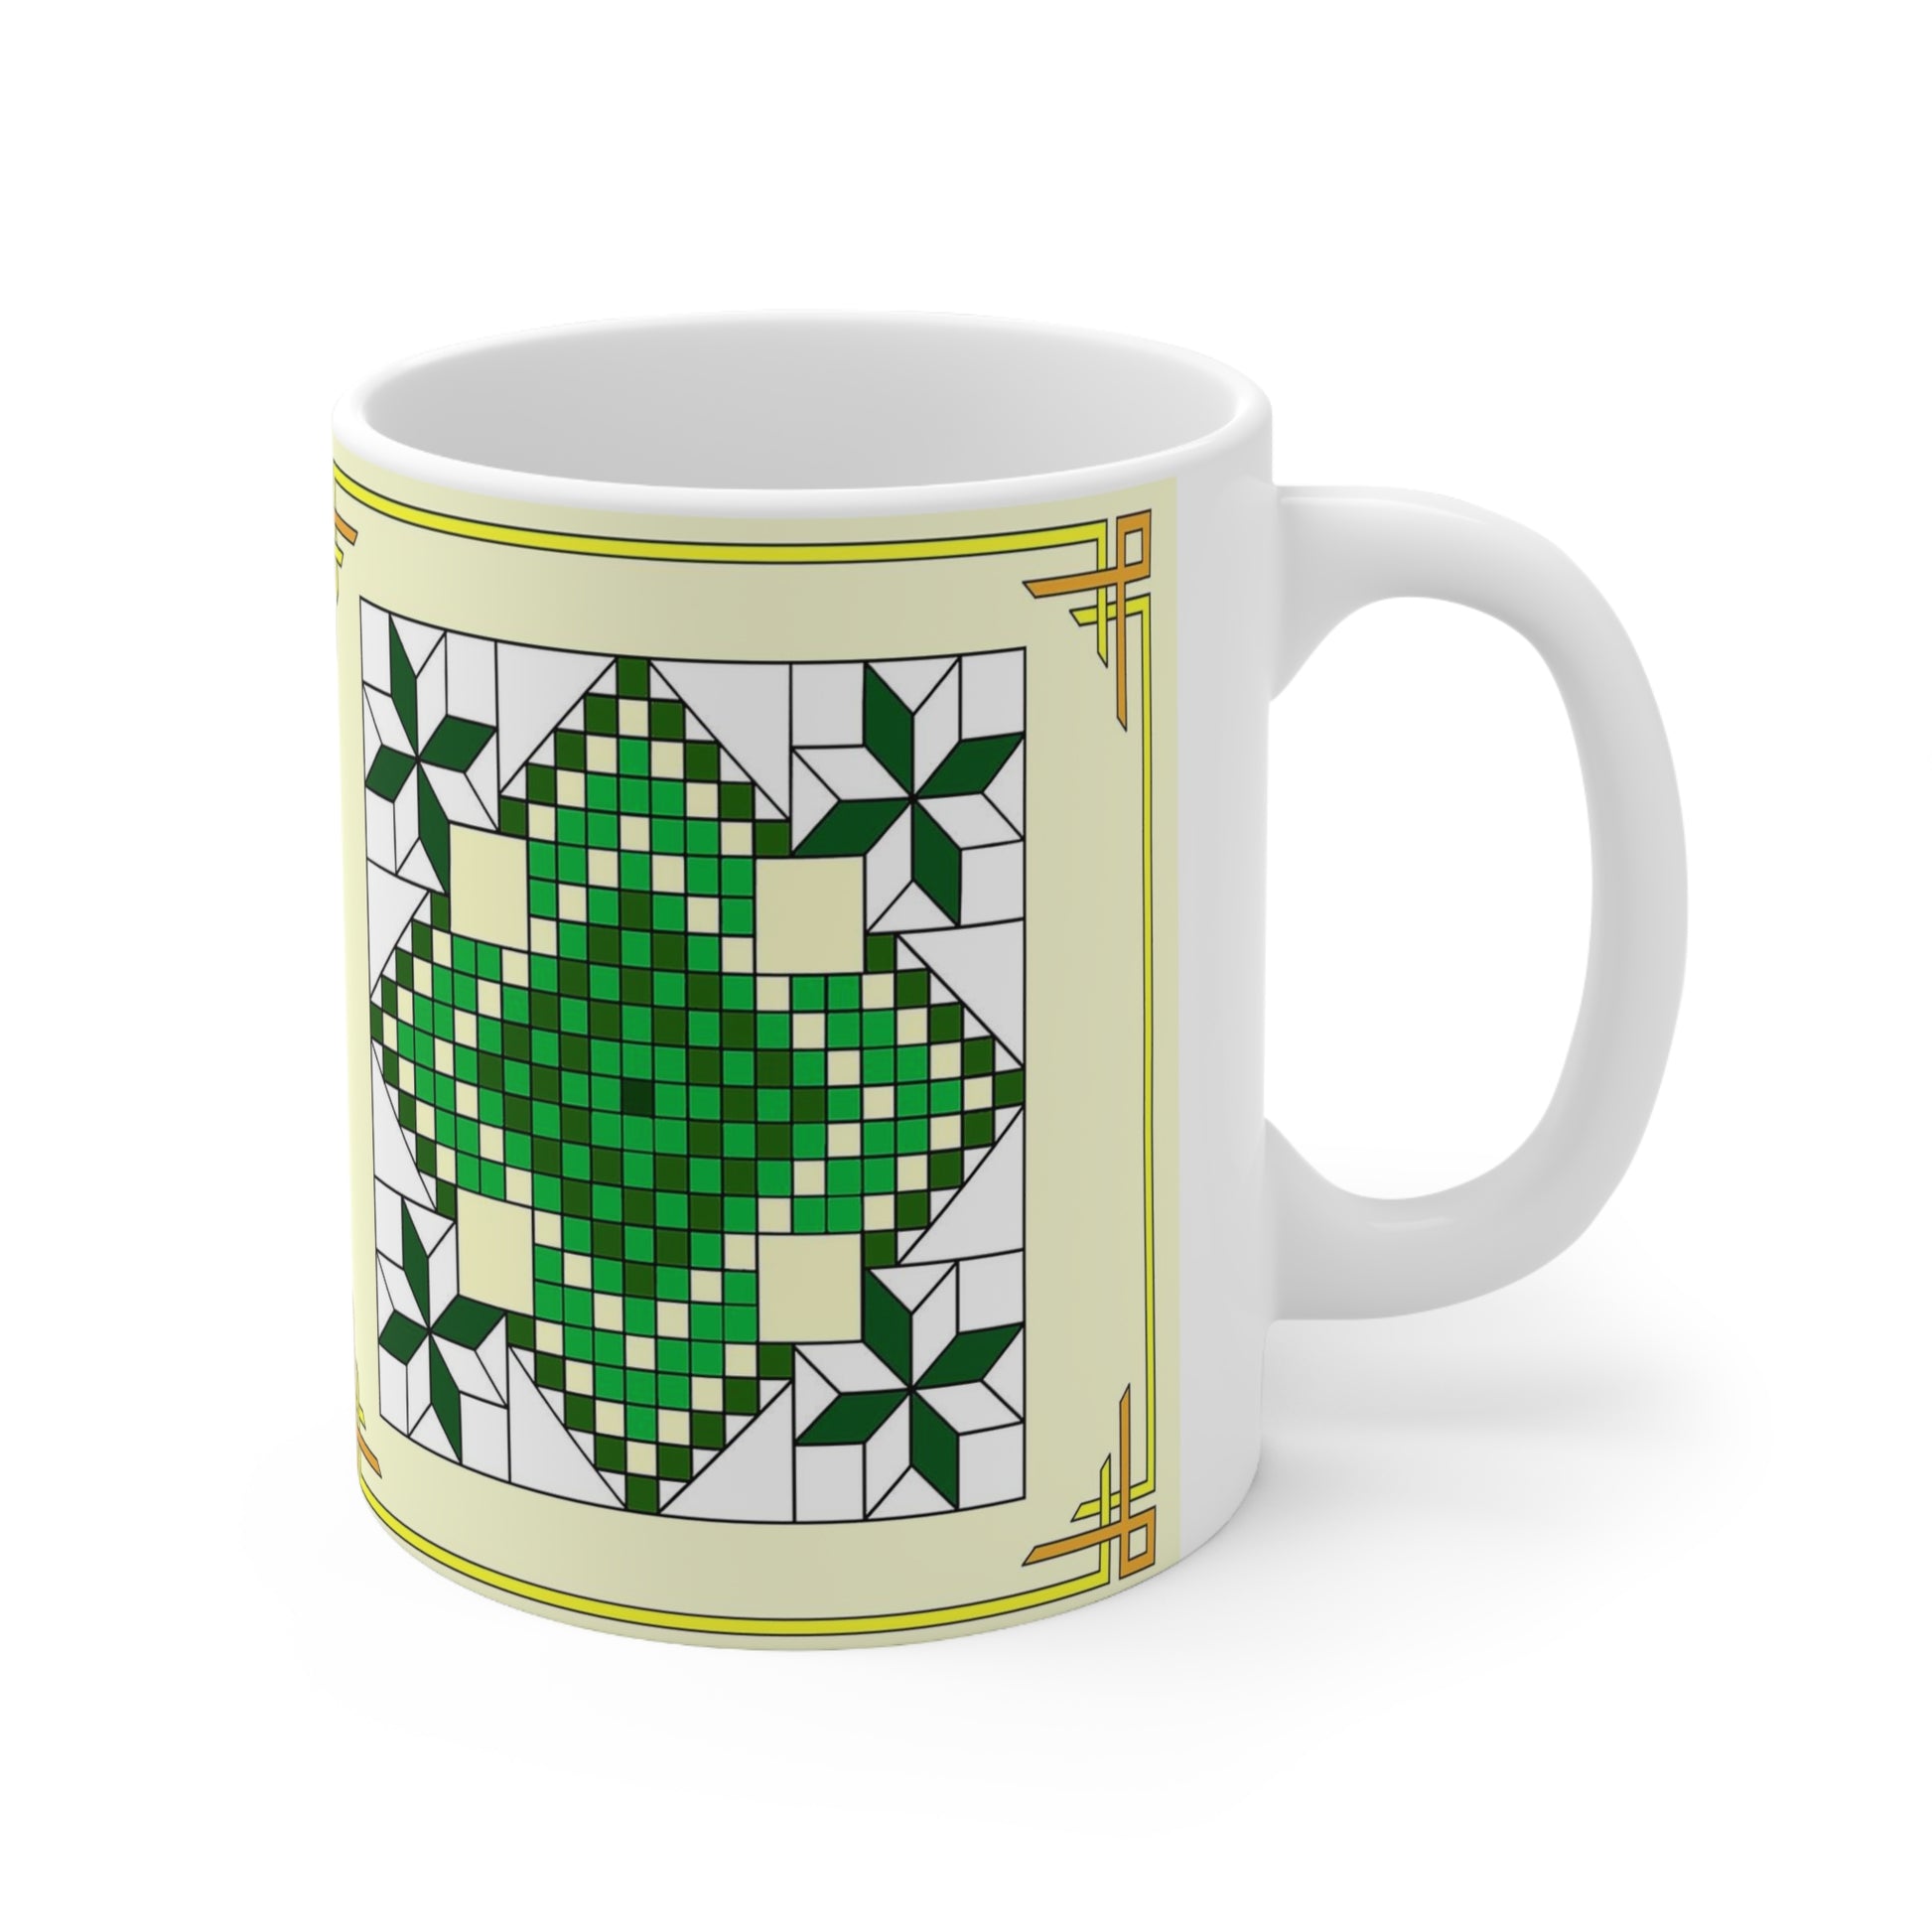 The Lincoln Quilt Design is a reproduction of a fine art design by artist Lee M. Buchanan and has the image on the front and back of the mug. This pattern style is usually listed in the Octogons, Diamonds and 8-Point Star group.